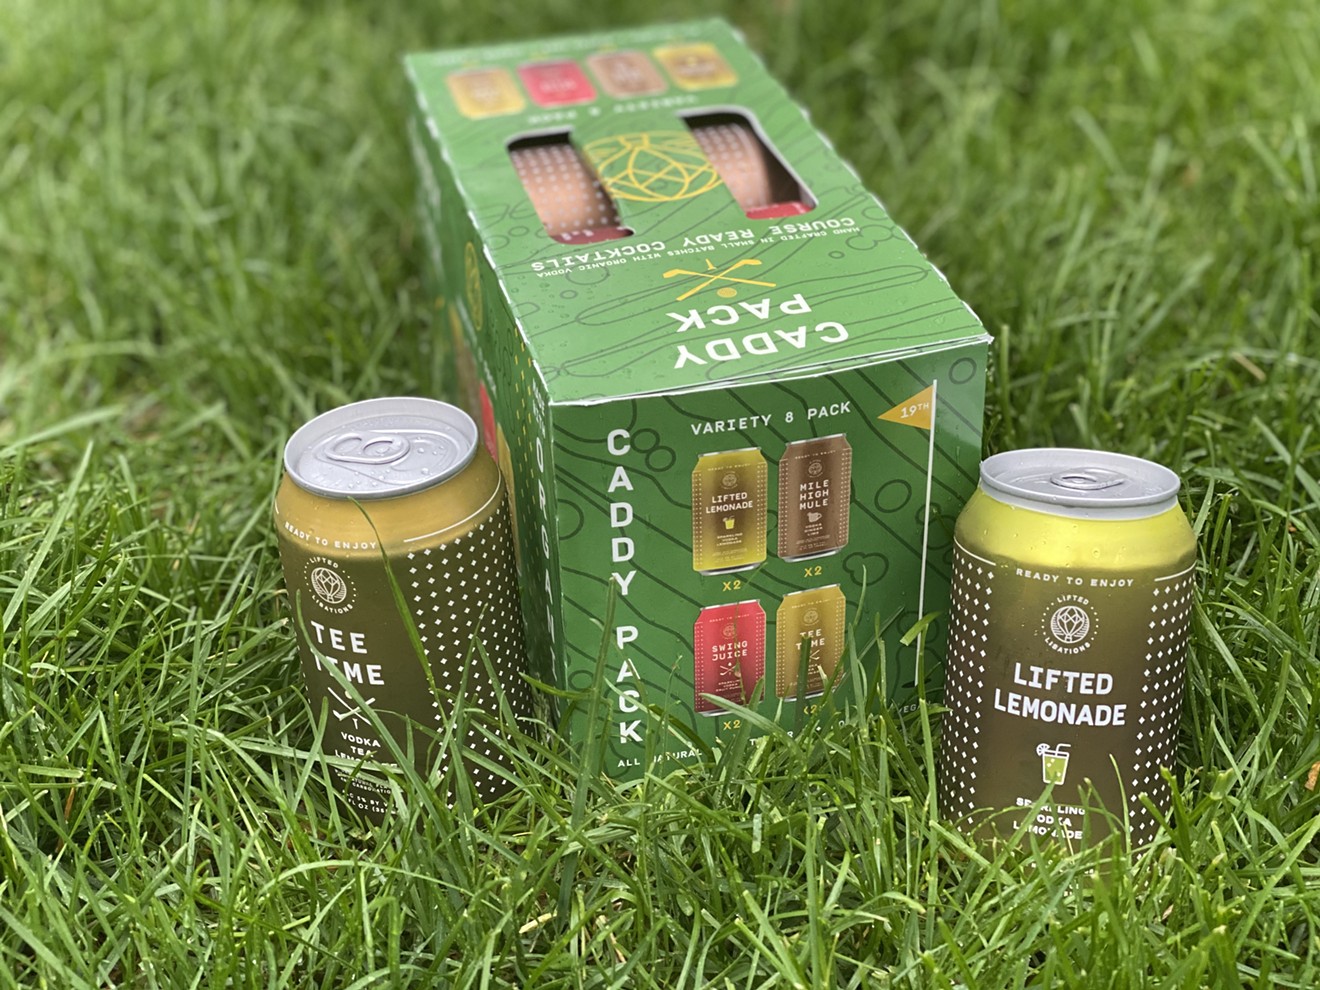 Tee Time, a boozy Arnold Palmer, is just one reason to pick up a Caddy Pack.